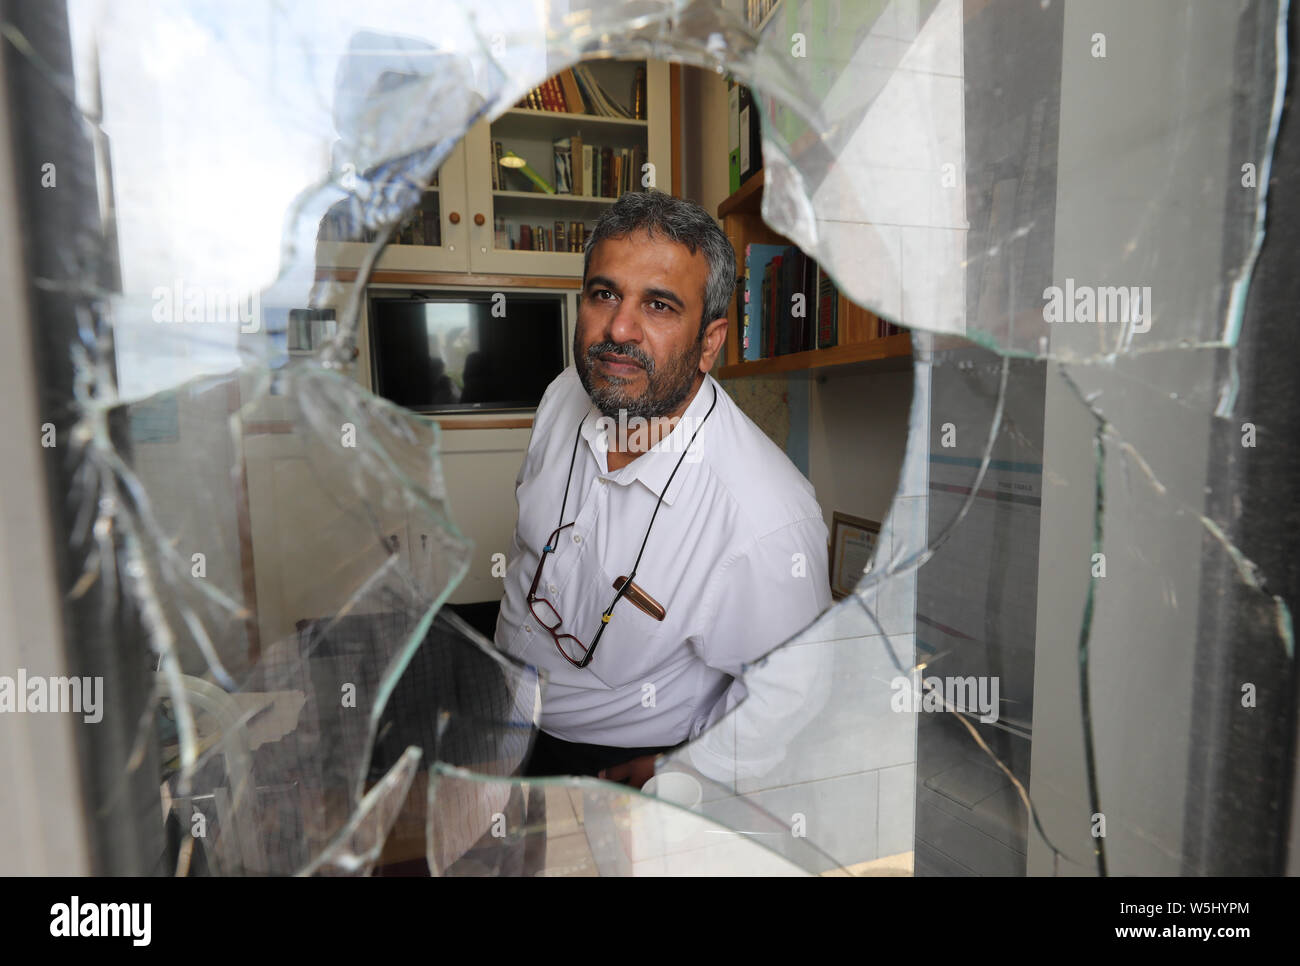 Shareef Mubashir, caretaker of Ahmadiyya Mosque in Galway surveys the damage after a break-in at the premises on Sunday. Stock Photo